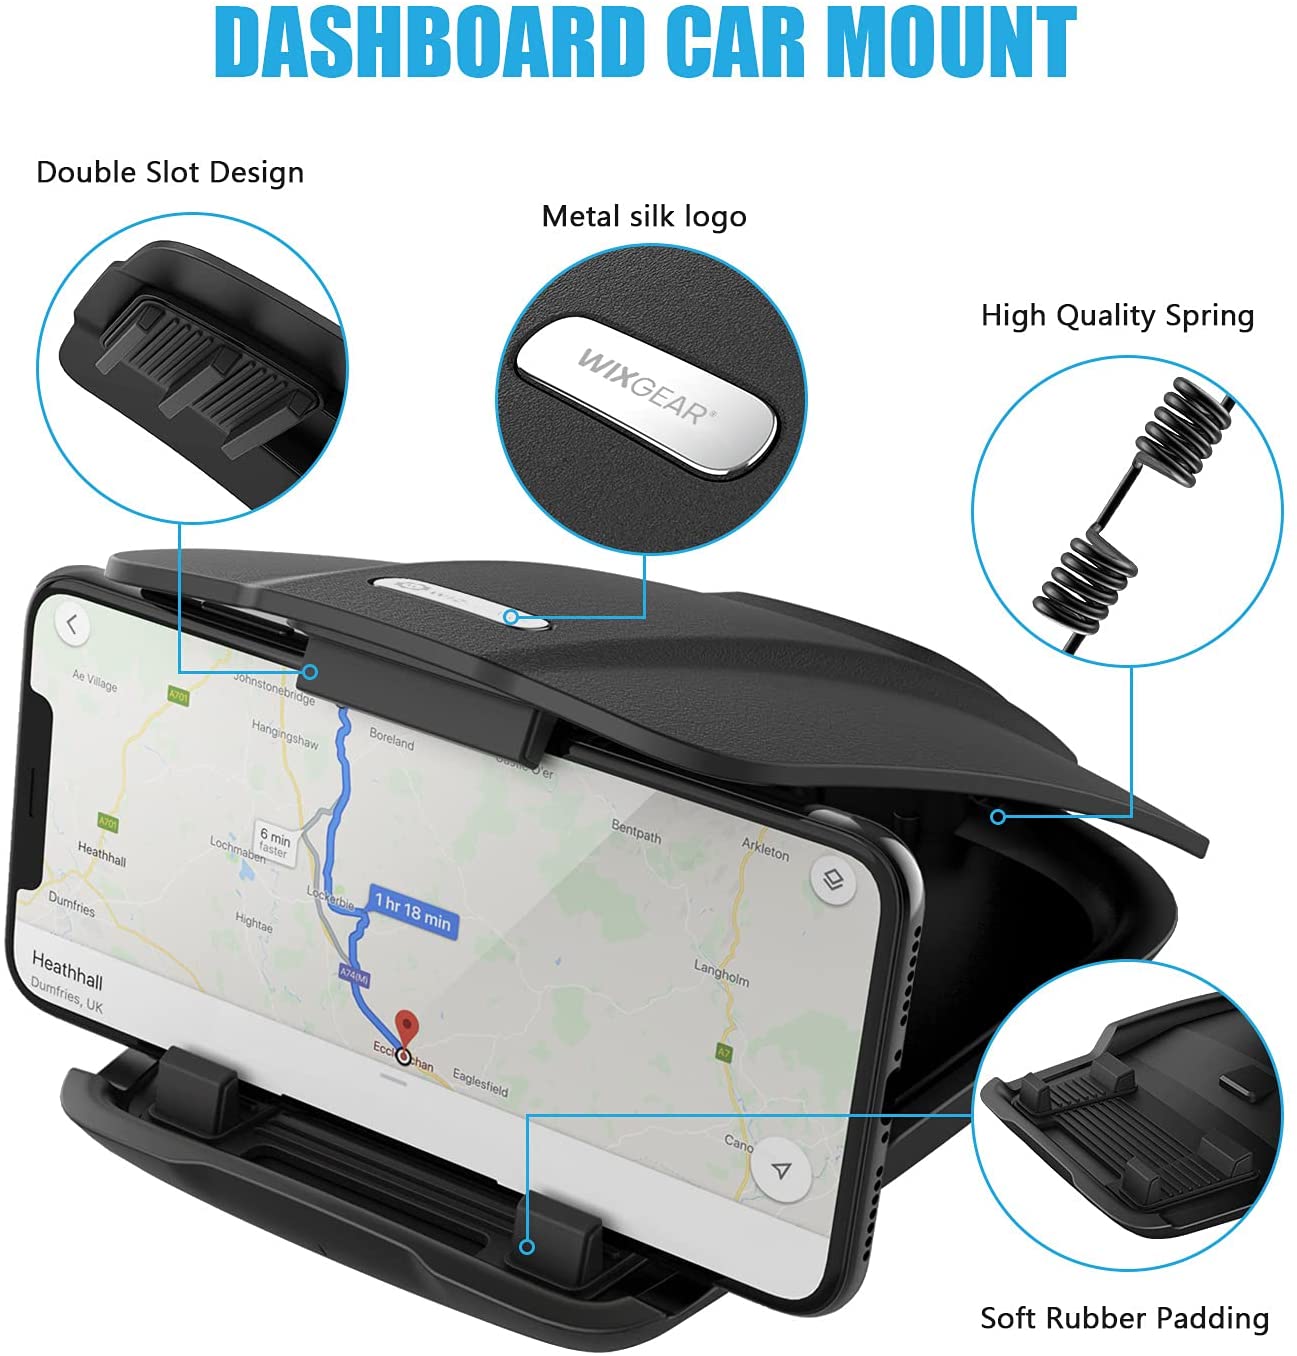 WixGear Dashboard Cell Phone Holder, Dash Mount Cell Phone Holder for Smartphone